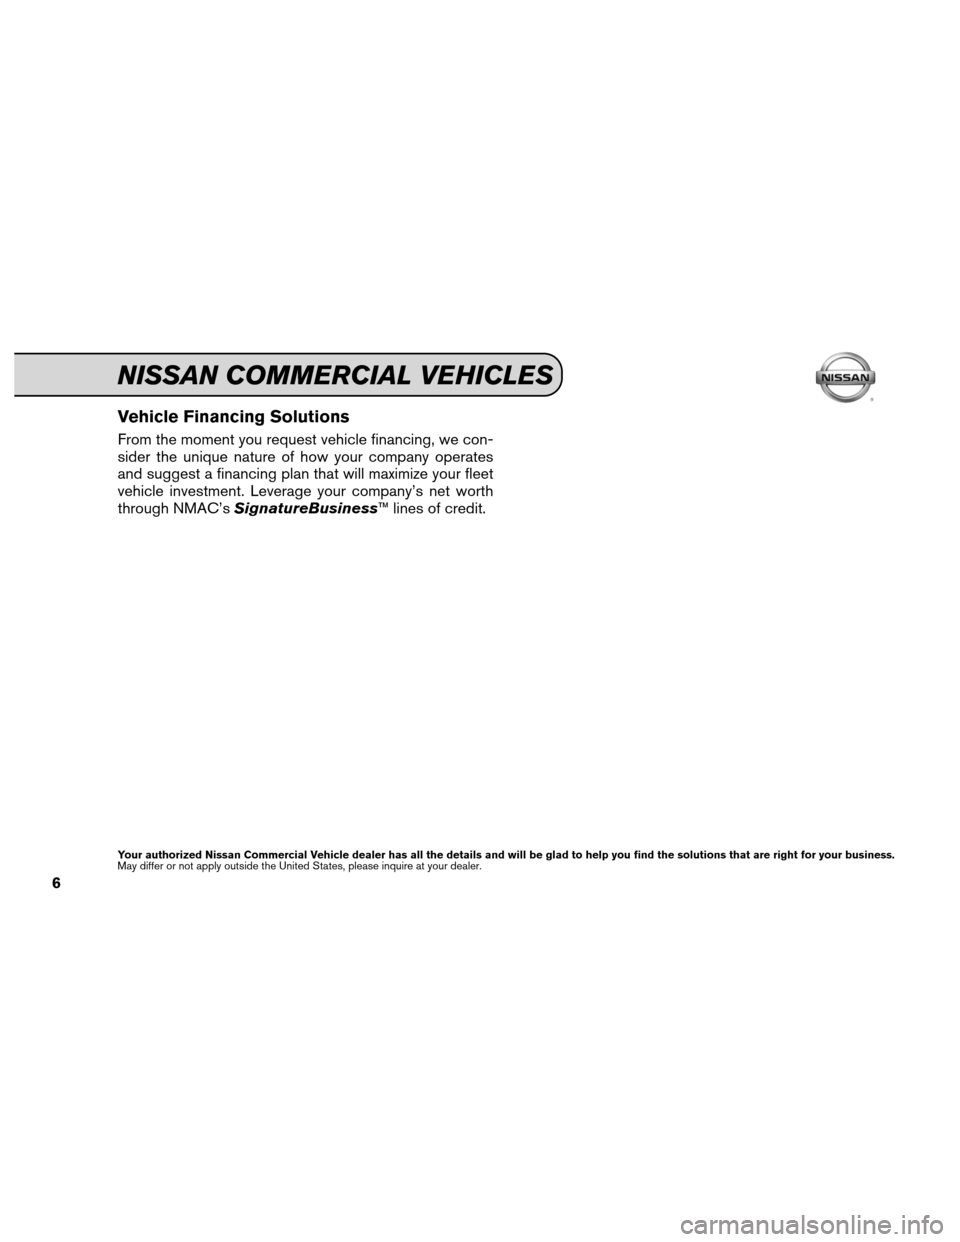 NISSAN QUEST 2012 RE52 / 4.G Service And Maintenance Guide Vehicle Financing Solutions
From the moment you request vehicle financing, we con-
sider the unique nature of how your company operates
and suggest a financing plan that will maximize your fleet
vehic